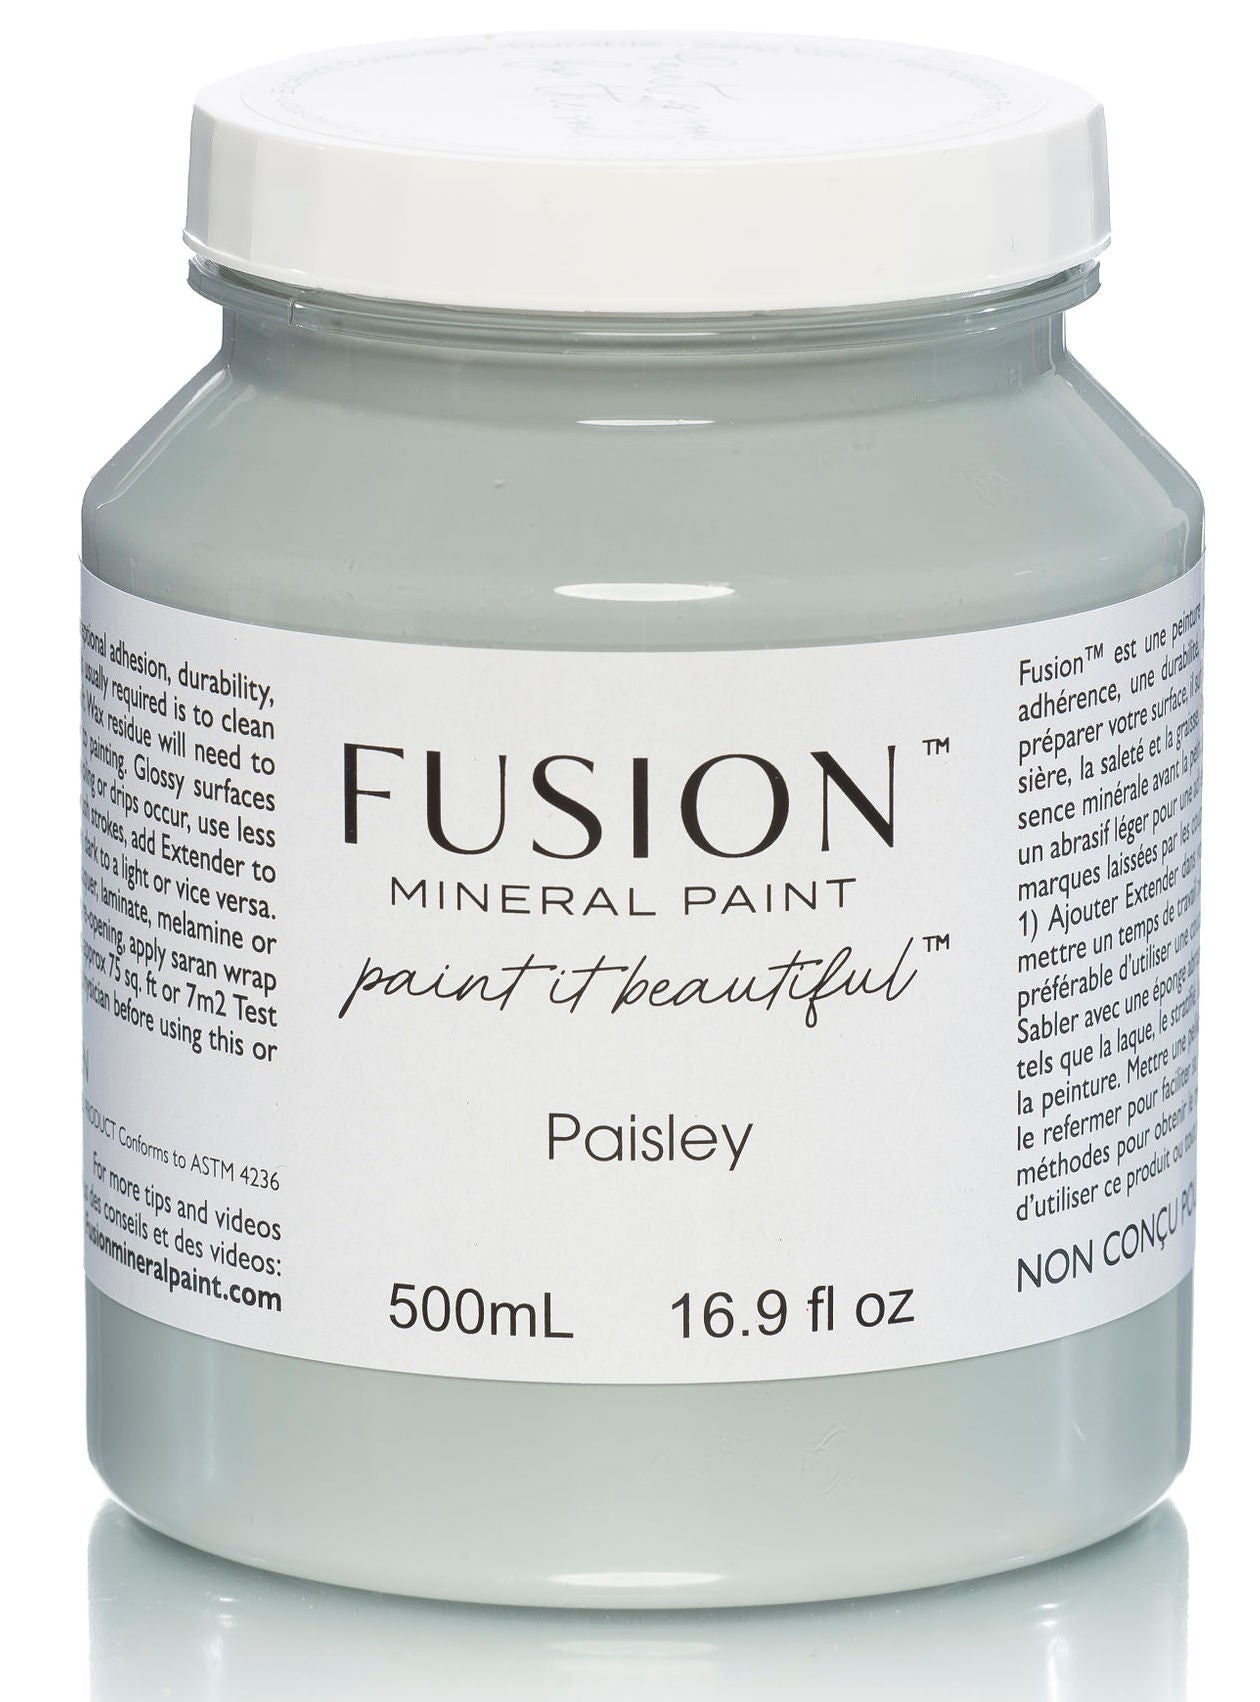 PAISLEY Fusion Mineral Paint